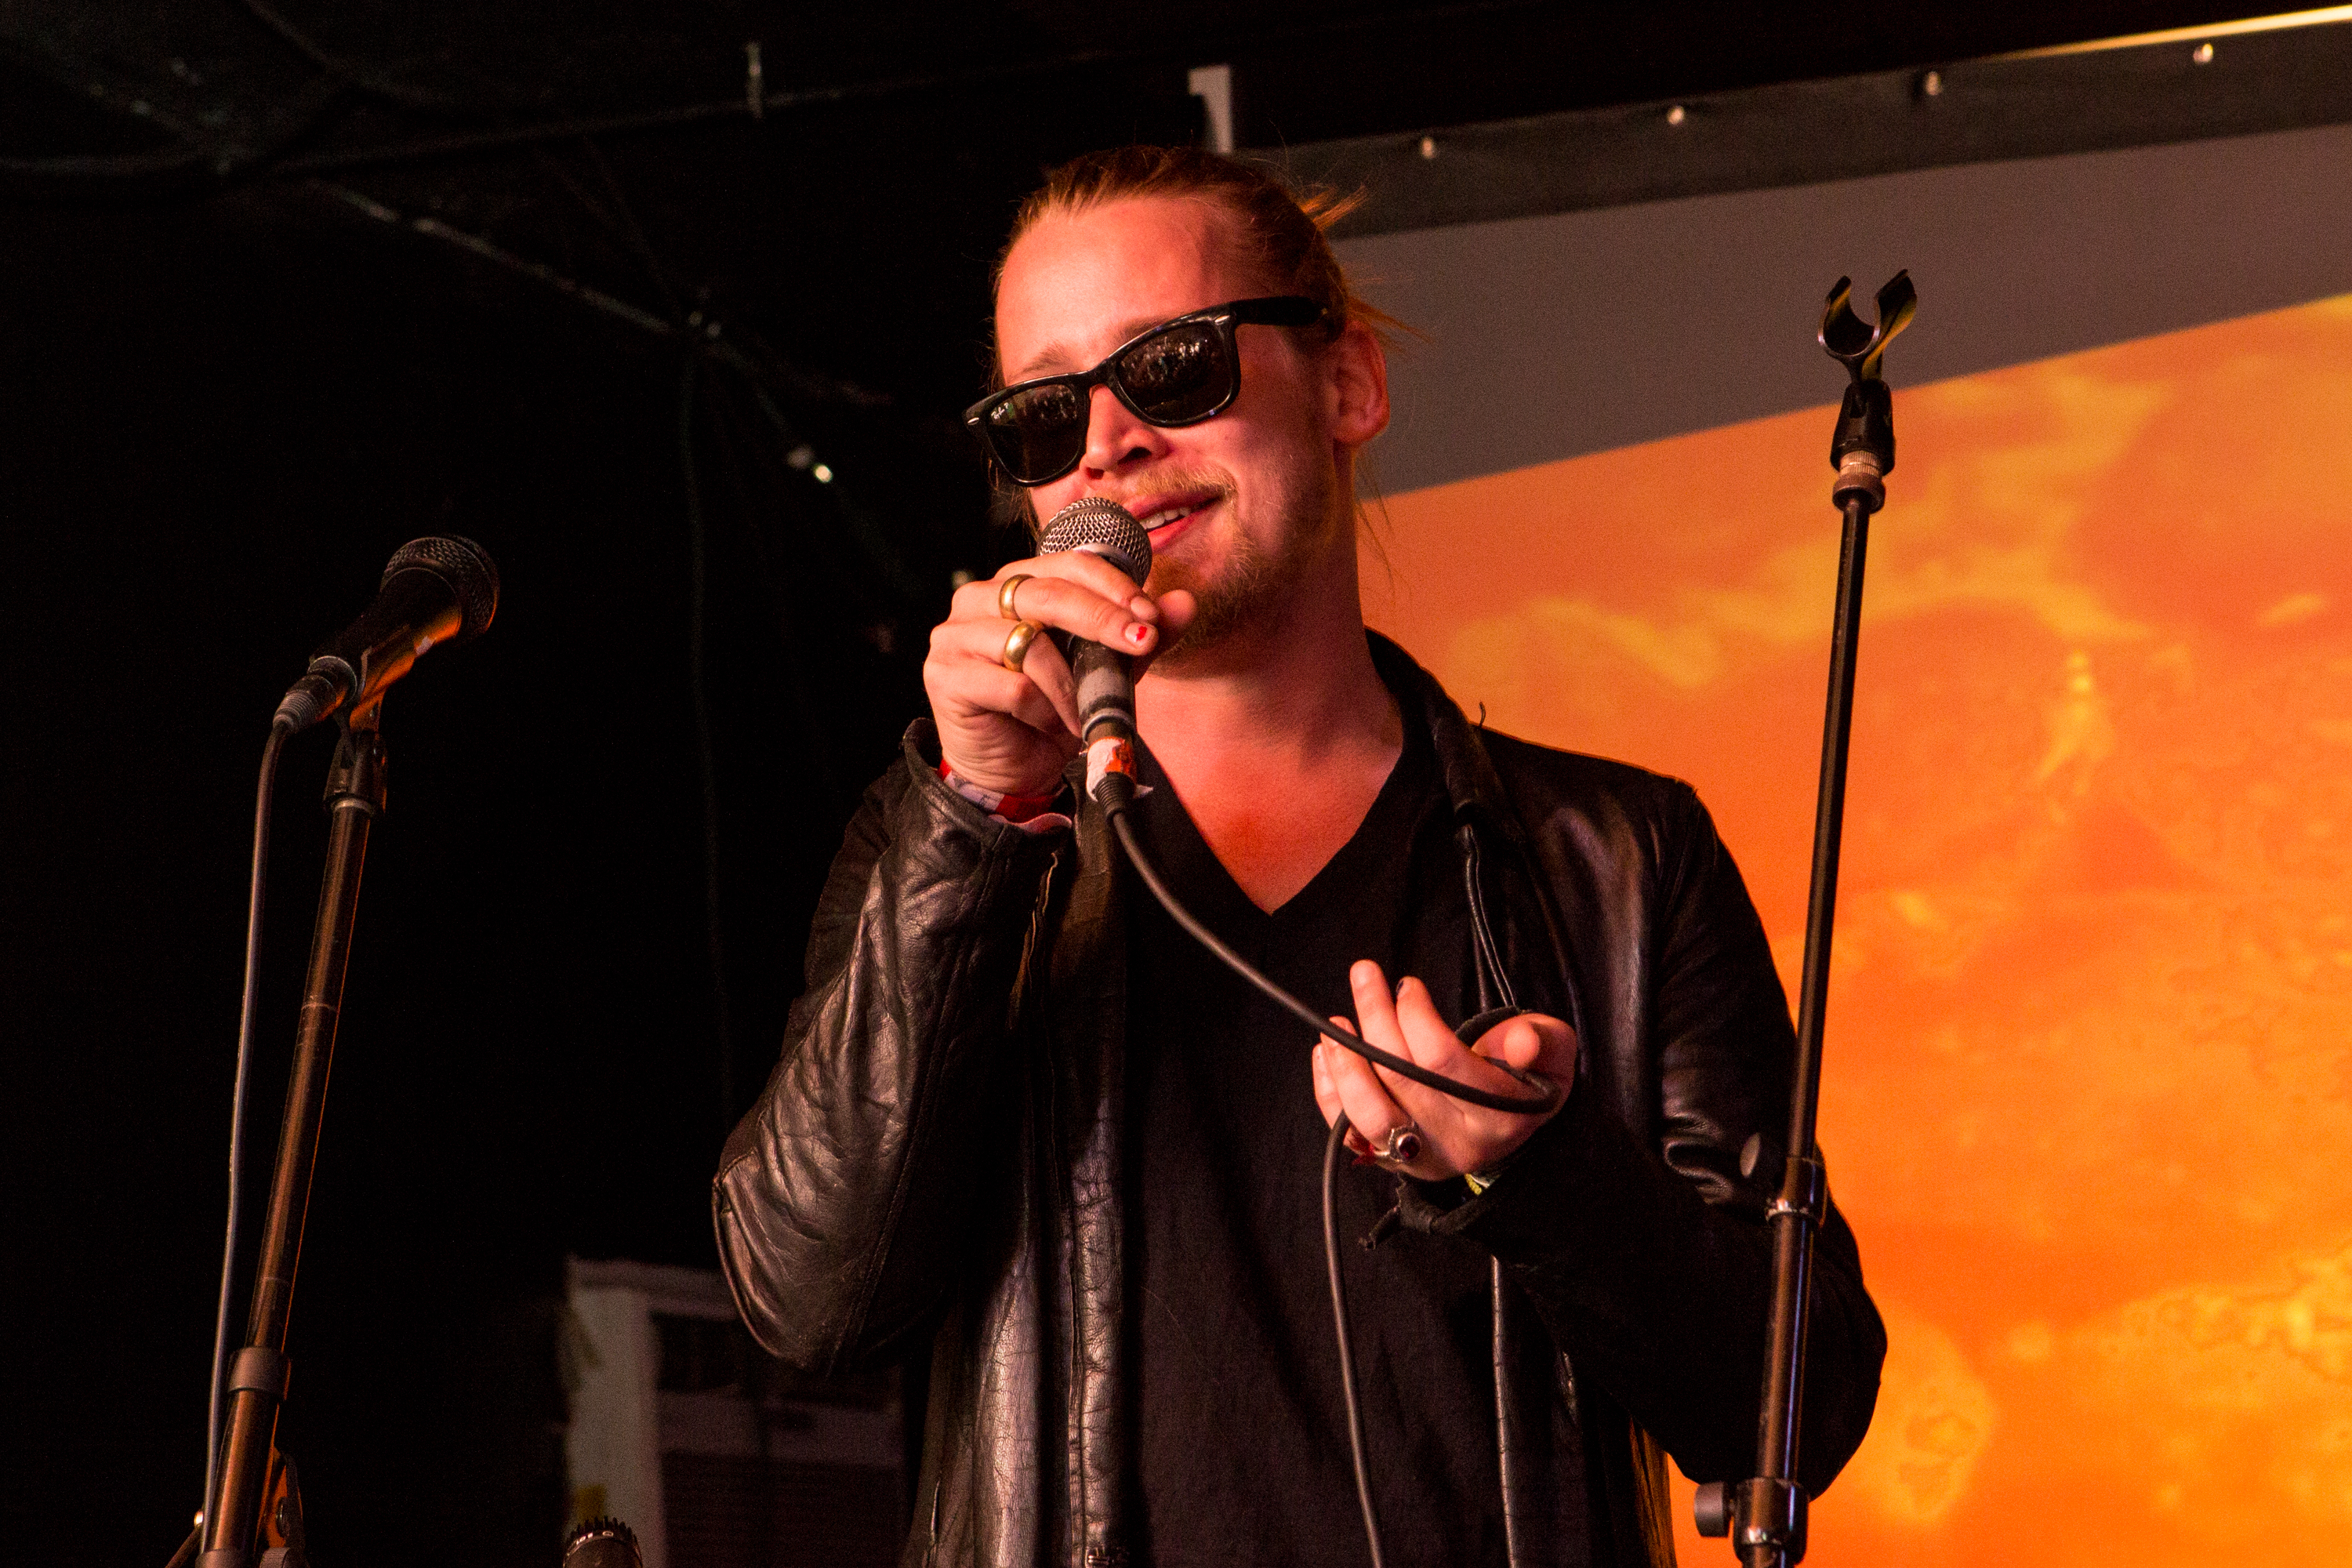 Macaulay Culkin performs in New Orleans, Louisiana on March 17, 2014 | Source: Getty Images